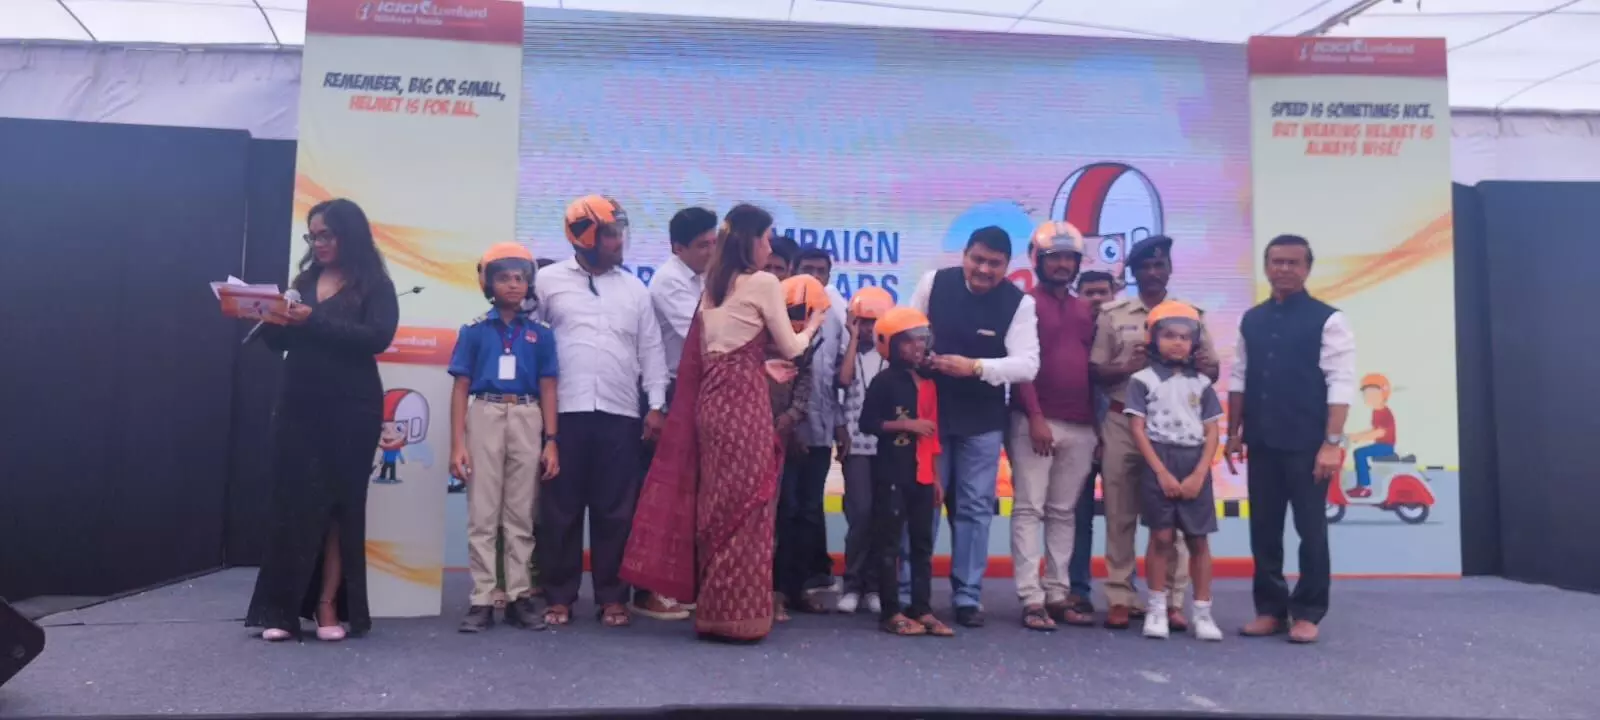 ICICI Lombard kick-started the ‘Ride to Safety’ rally in Hyderabad